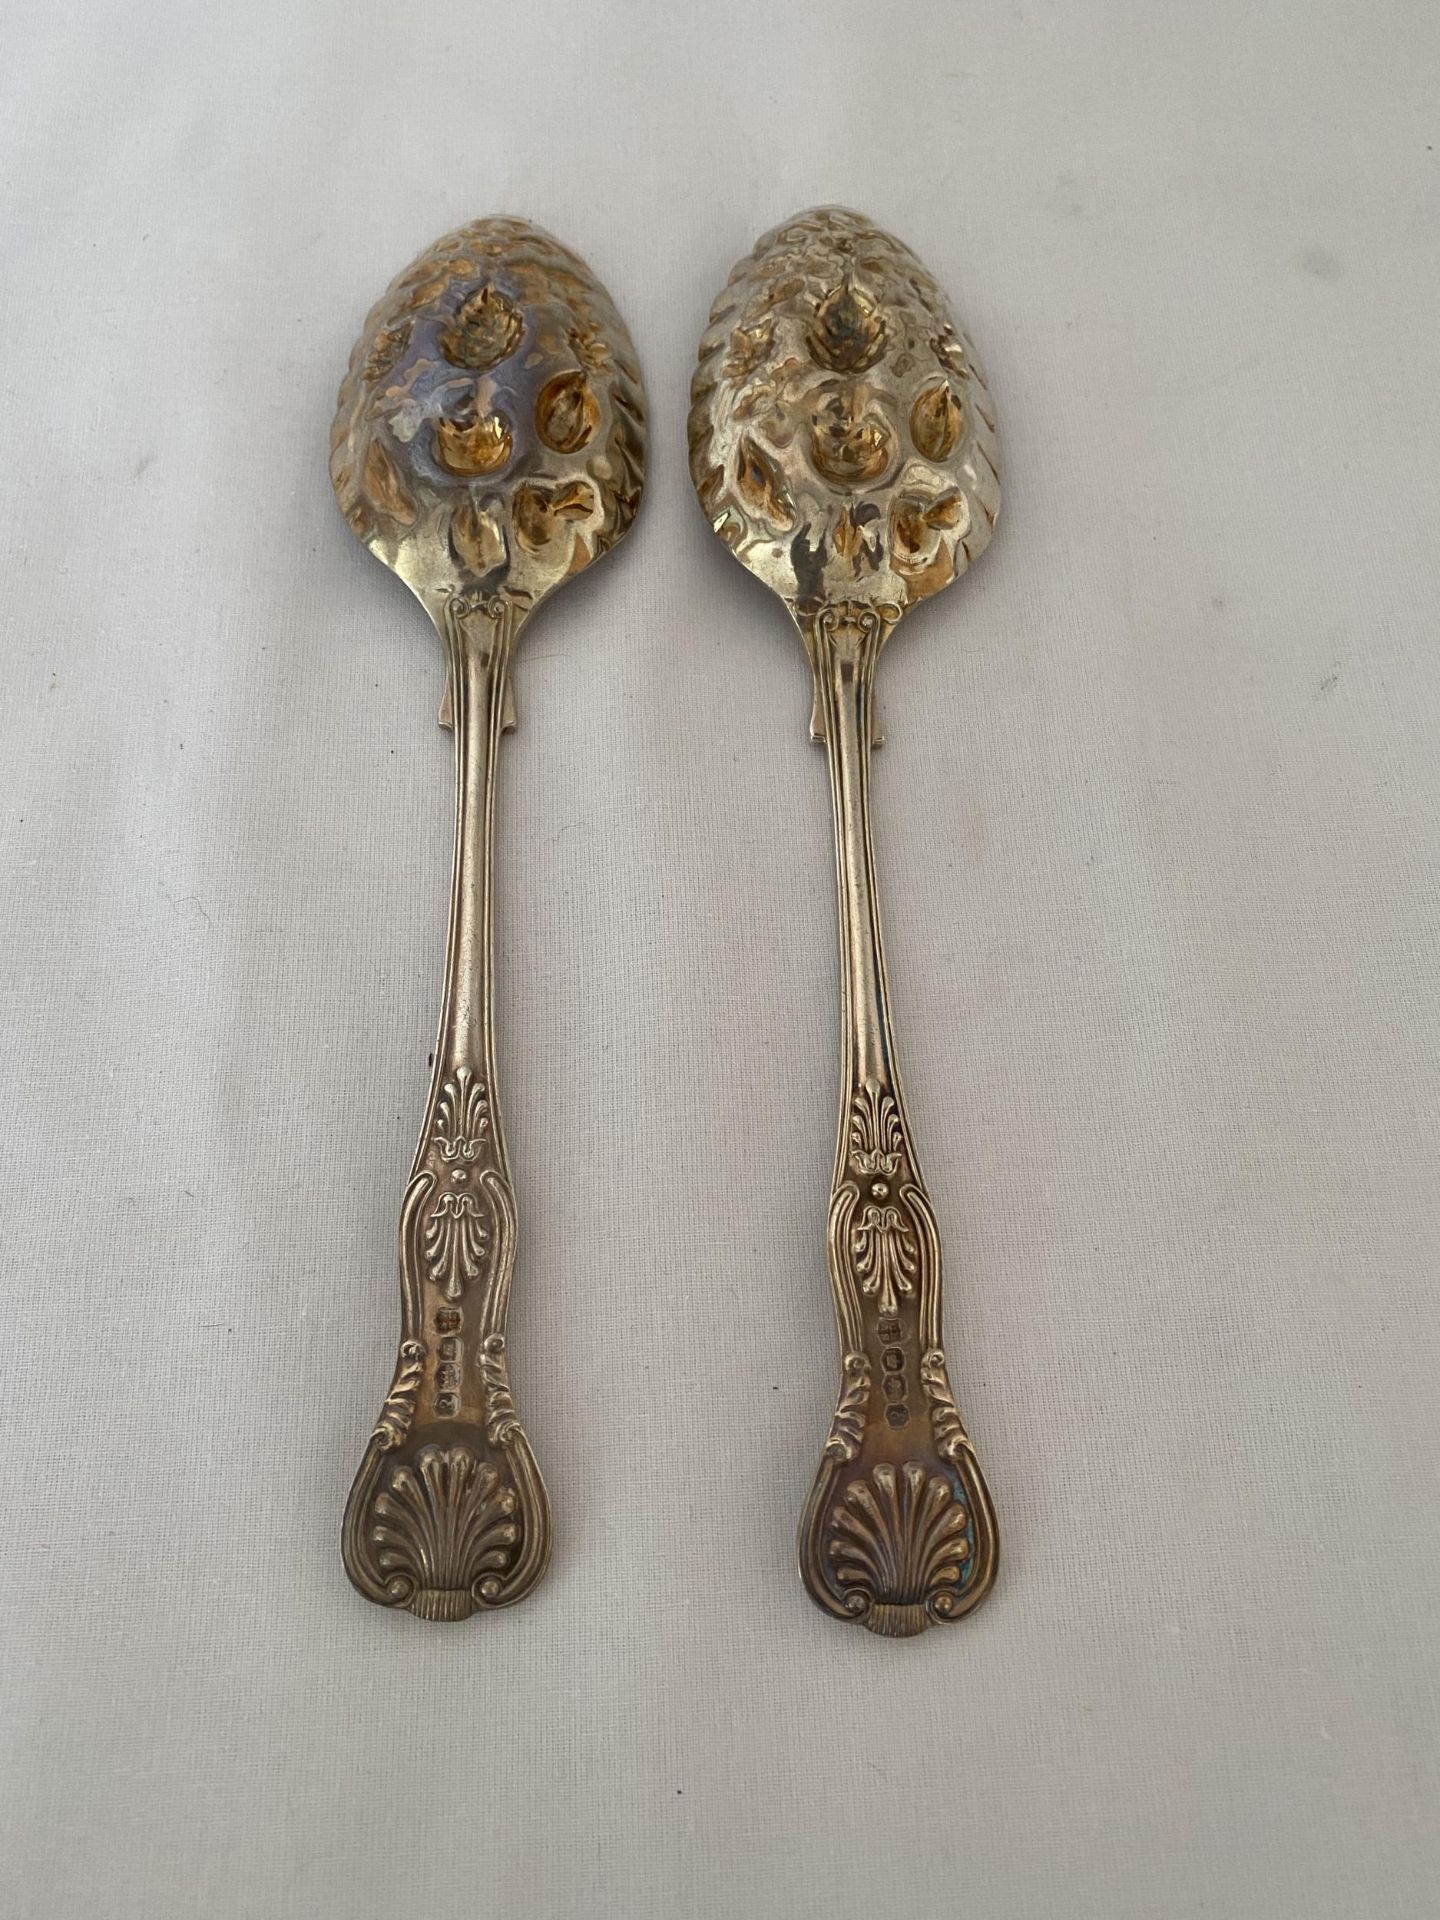 A PAIR OF ELIZABETH II 1972 HALLMARKED SHEFFIELD SILVER BERRY SPOONS, MAKER COOPER BROTHERS & SONS - Image 7 of 12